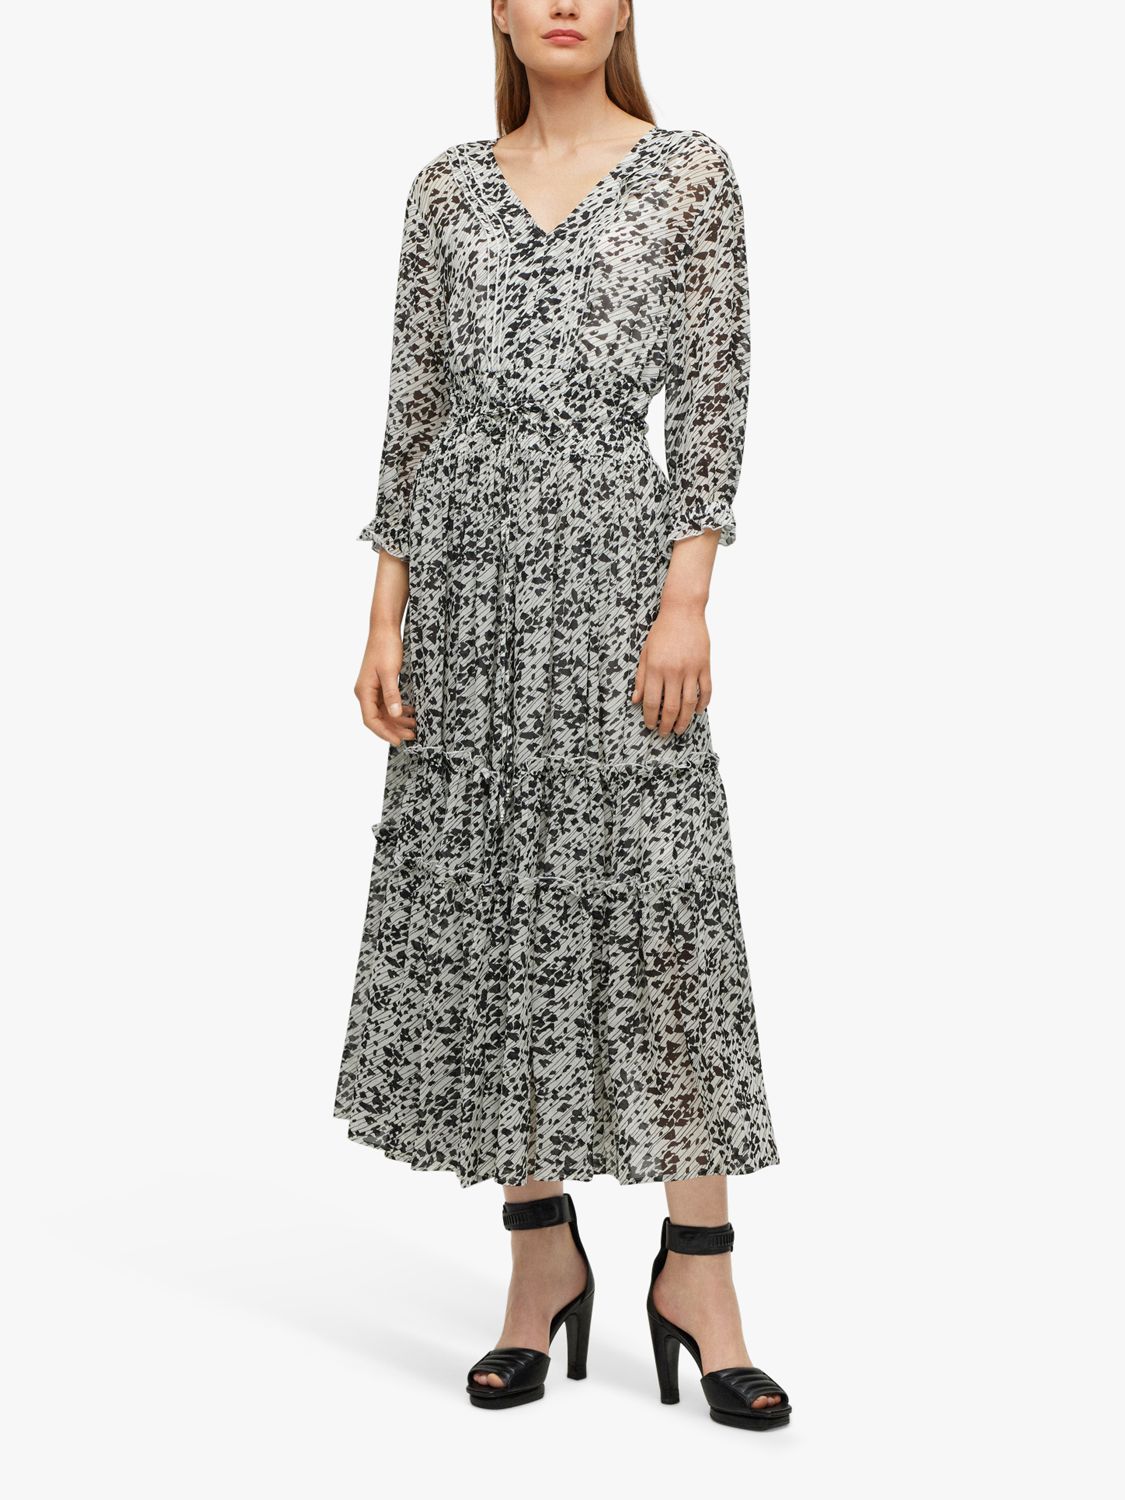 HUGO BOSS Dellima Tiered Dress, Open Miscellaneous at John Lewis & Partners